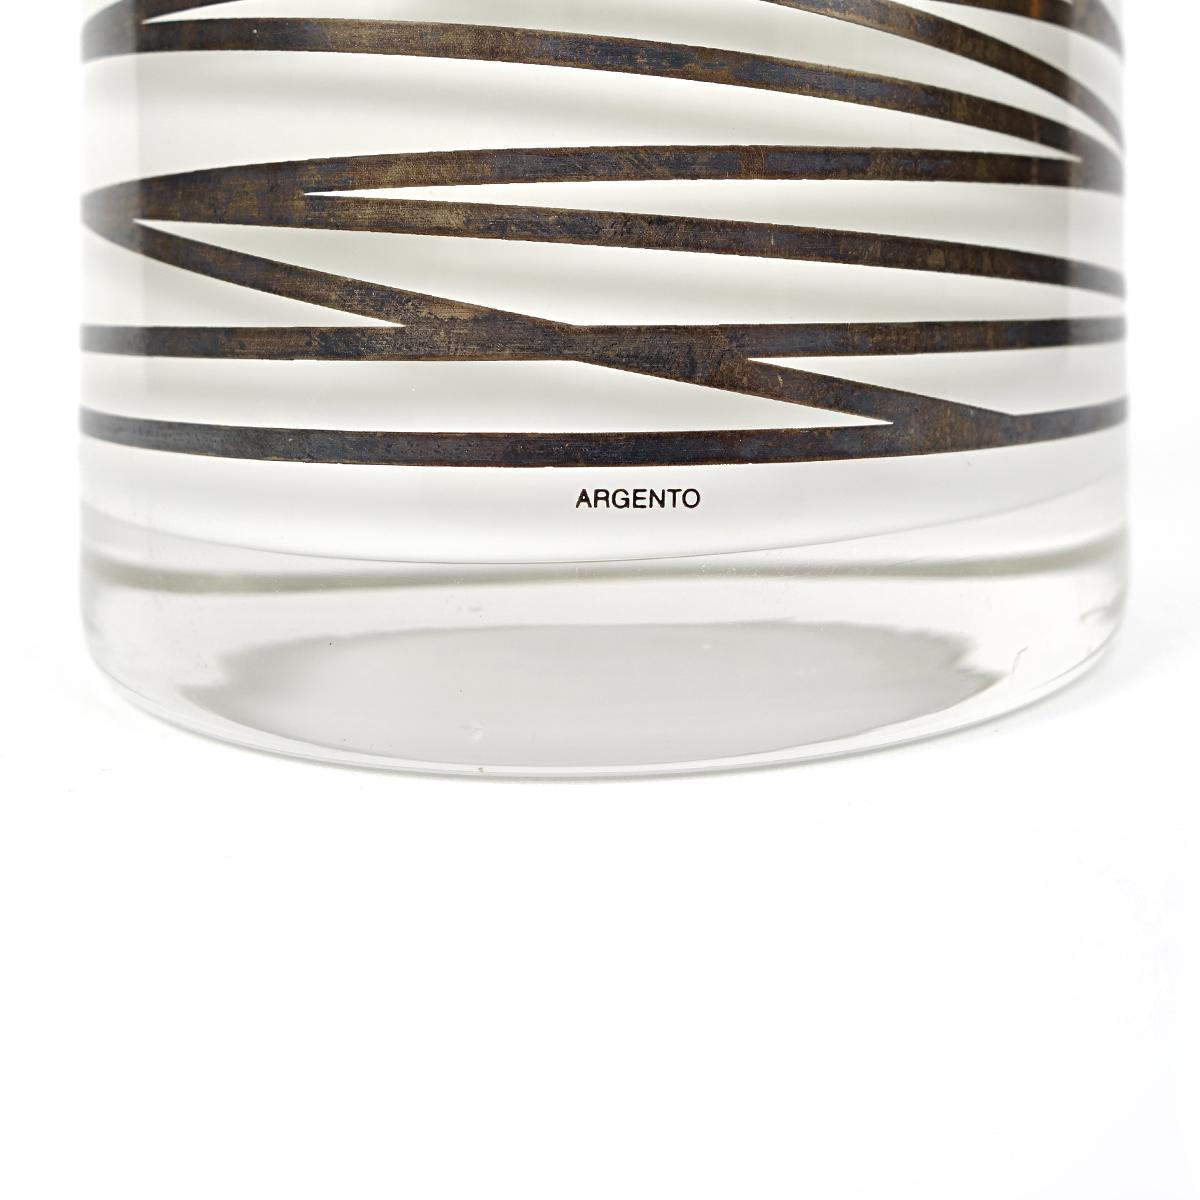 20th Century Post-Modern Glass Vase by Marco Susani for HWC Egizia by Sottsass Associati For Sale